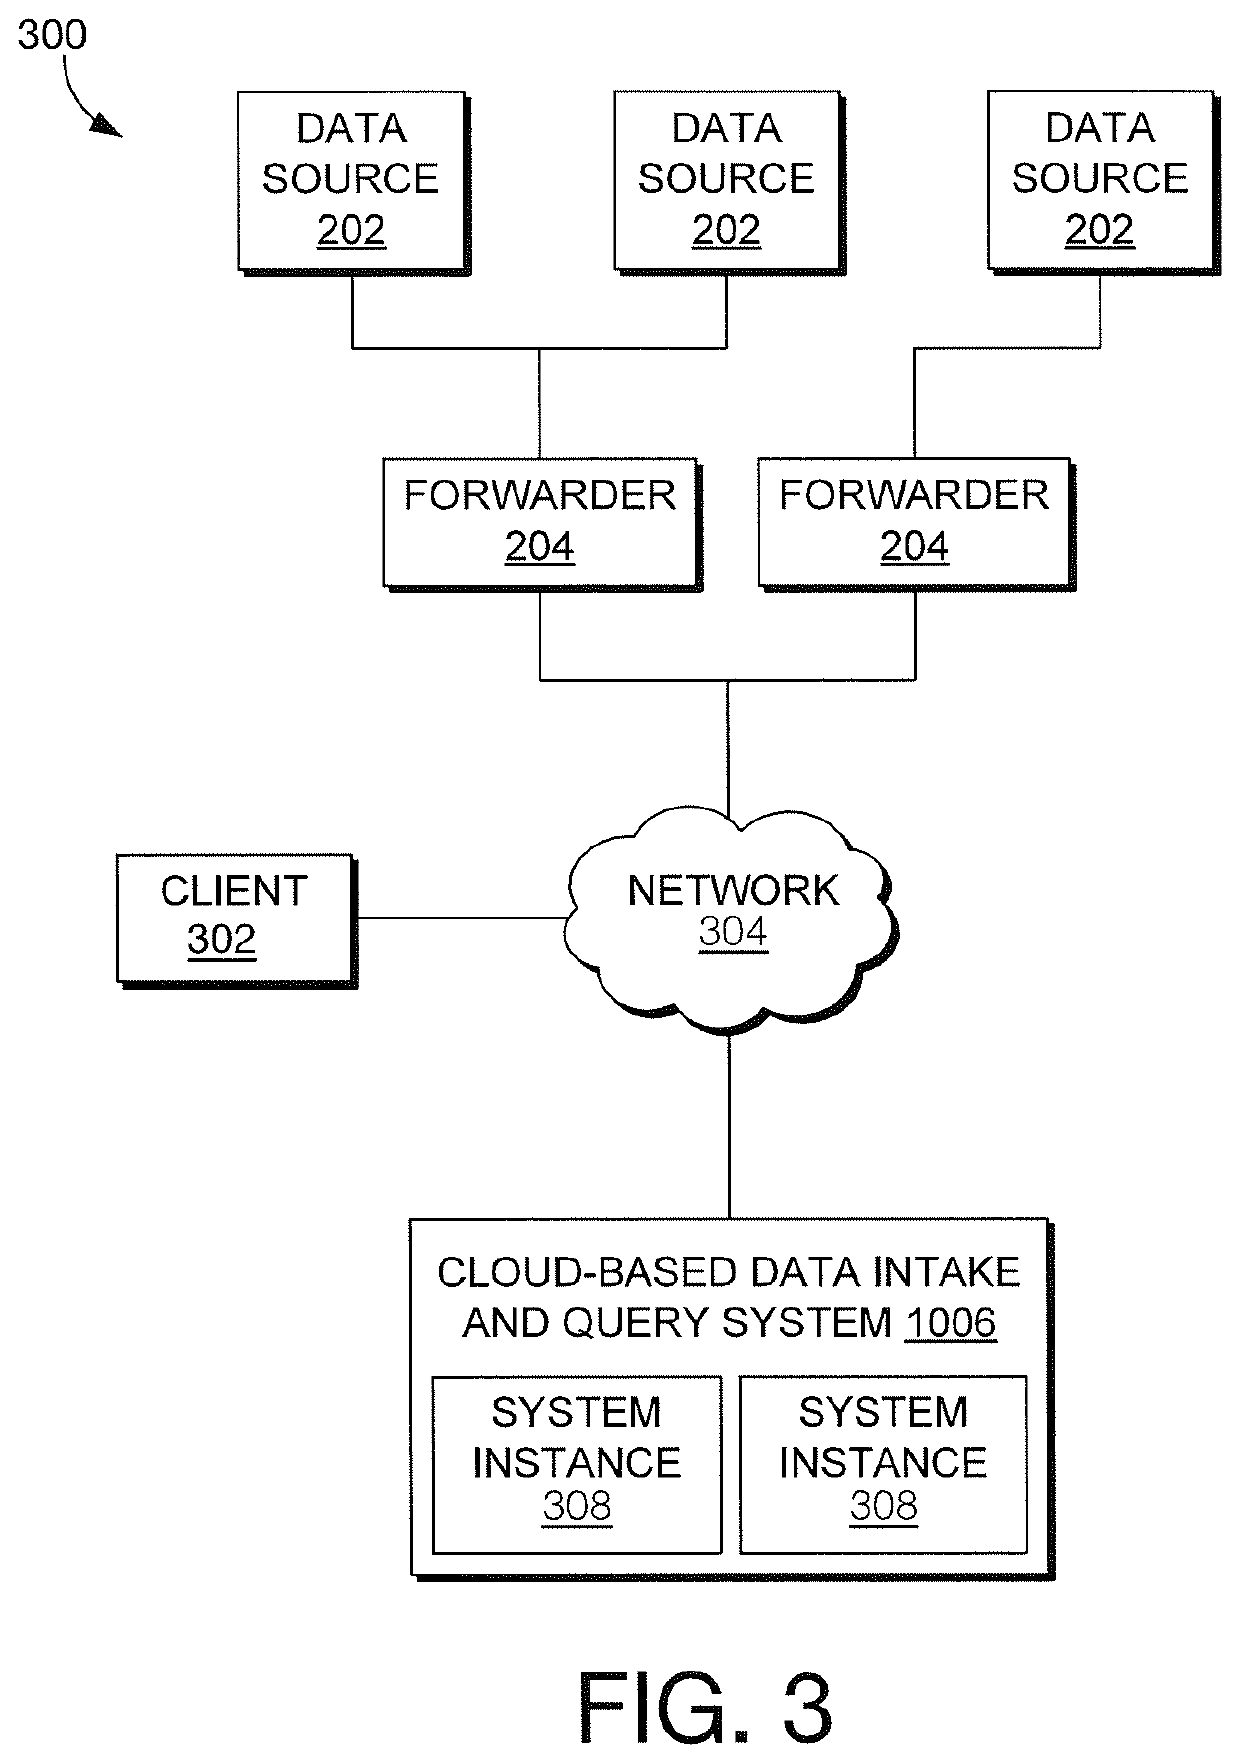 Real-Time Measurement And System Monitoring Based On Generated Dependency Graph Models Of System Components